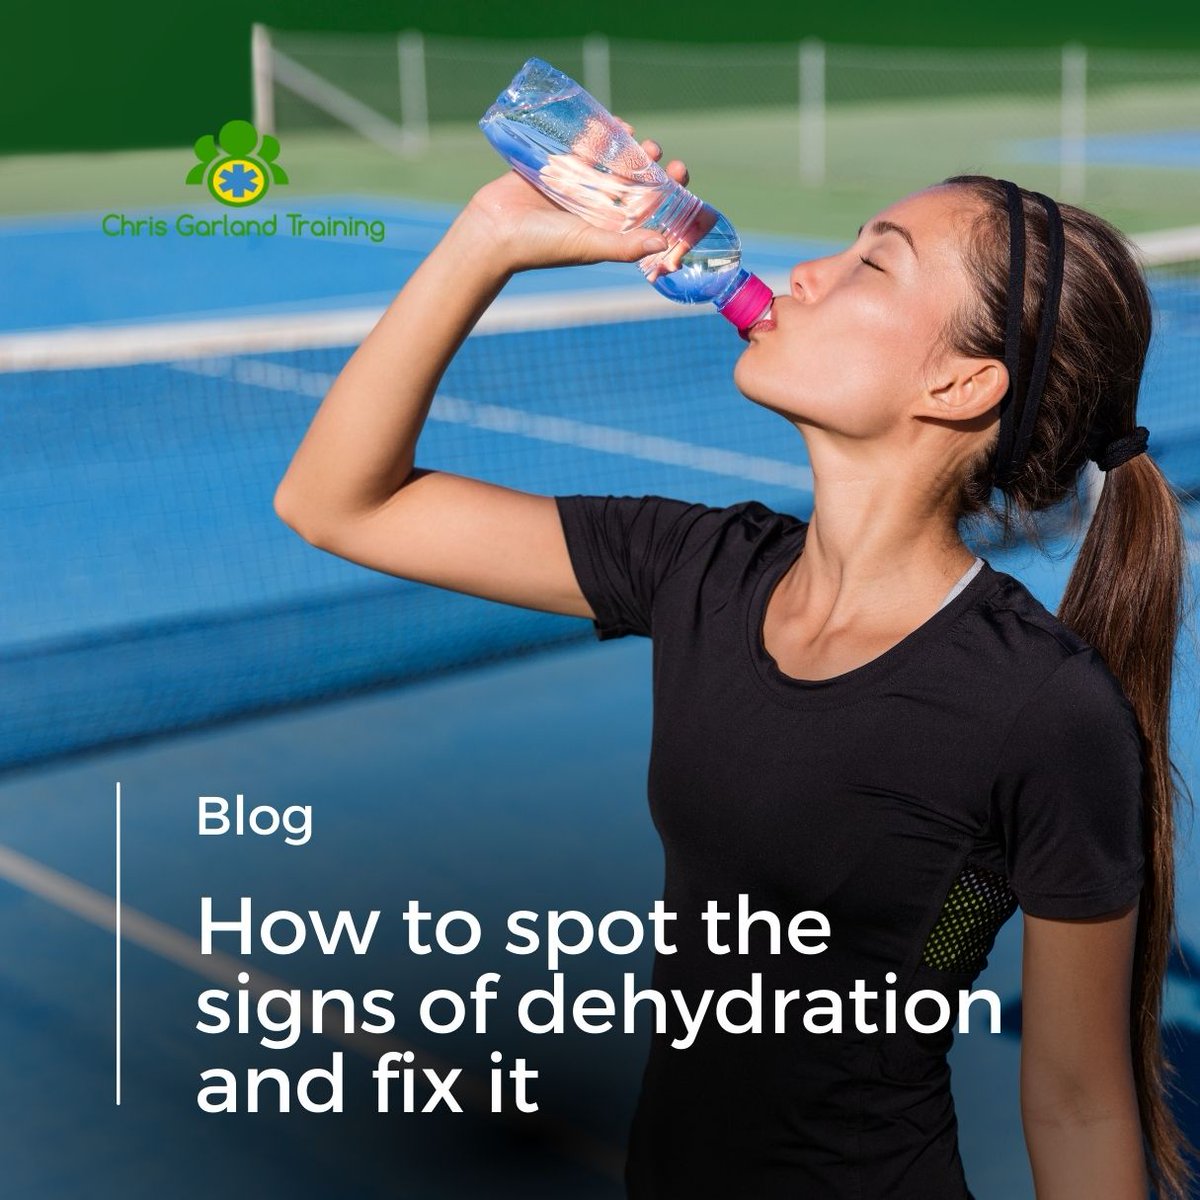 Dehydration occurs when you use or lose more fluid than you take in, and your body doesn’t have enough water and other fluids to carry out its normal functions. Read more about dehydration in our handy blog: chrisgarlandtraining.co.uk/spot-dehydrati… #Dehydration #Rehydration #SpottingDehydration